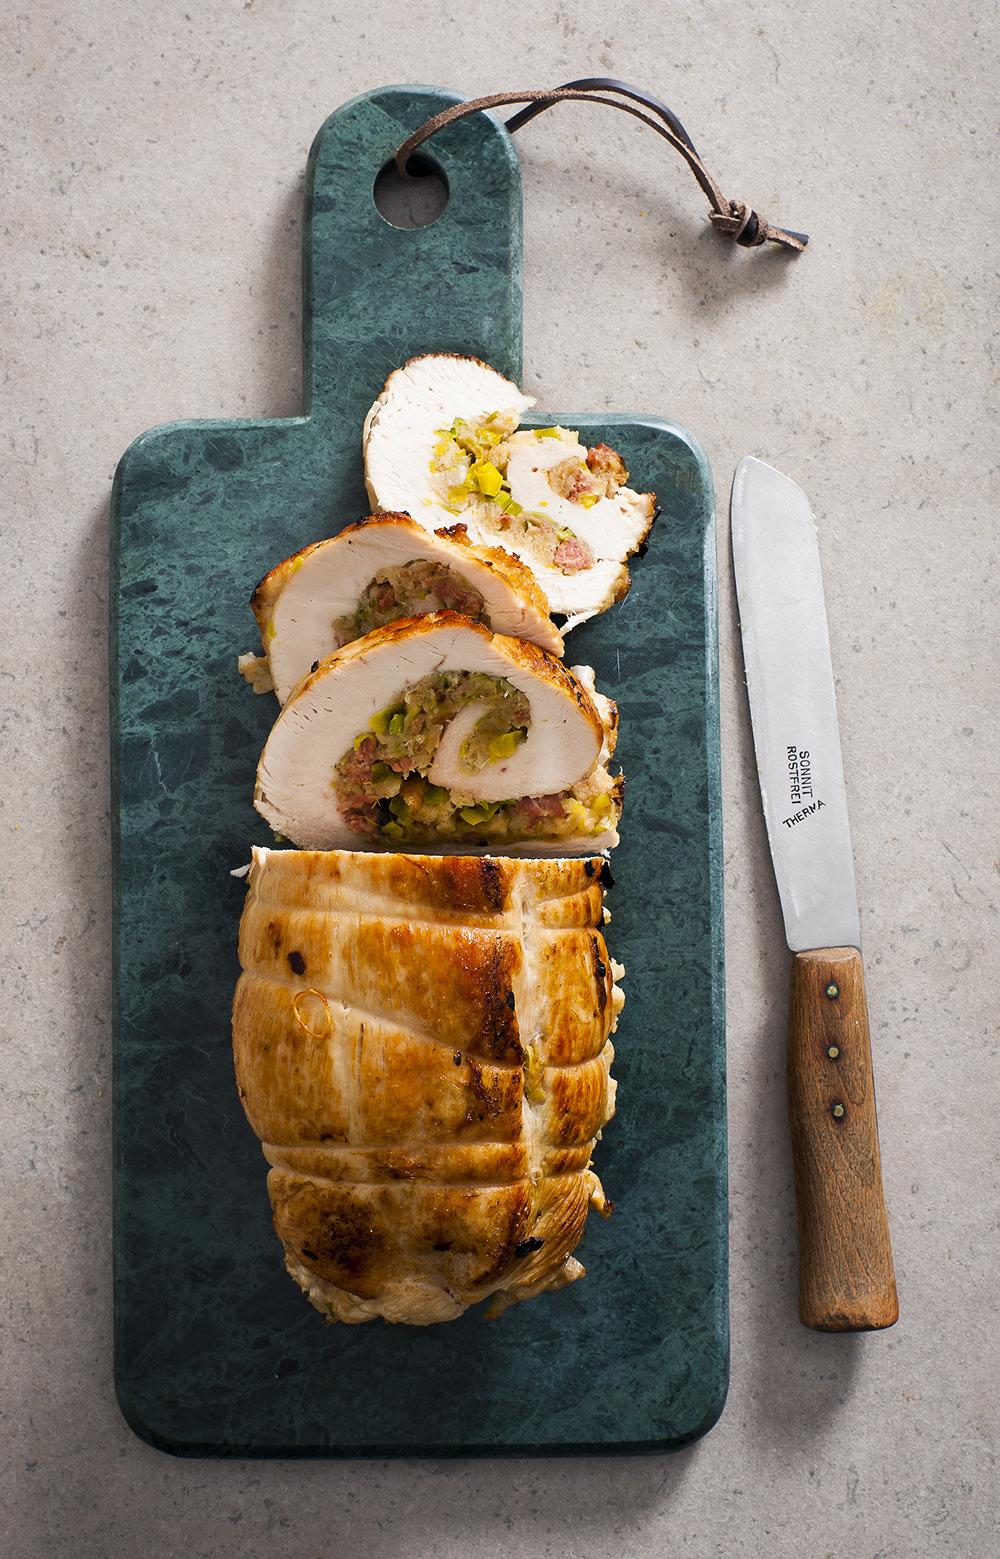 Rotolo di tacchino al passito con carote Turkey Roulade in Passito Wine with Carrots Serves 4 Preparation: 20 minutes, plus cooling time Cooking: 1 hour 3 tablespoons butter 1 leek, trimmed and cut